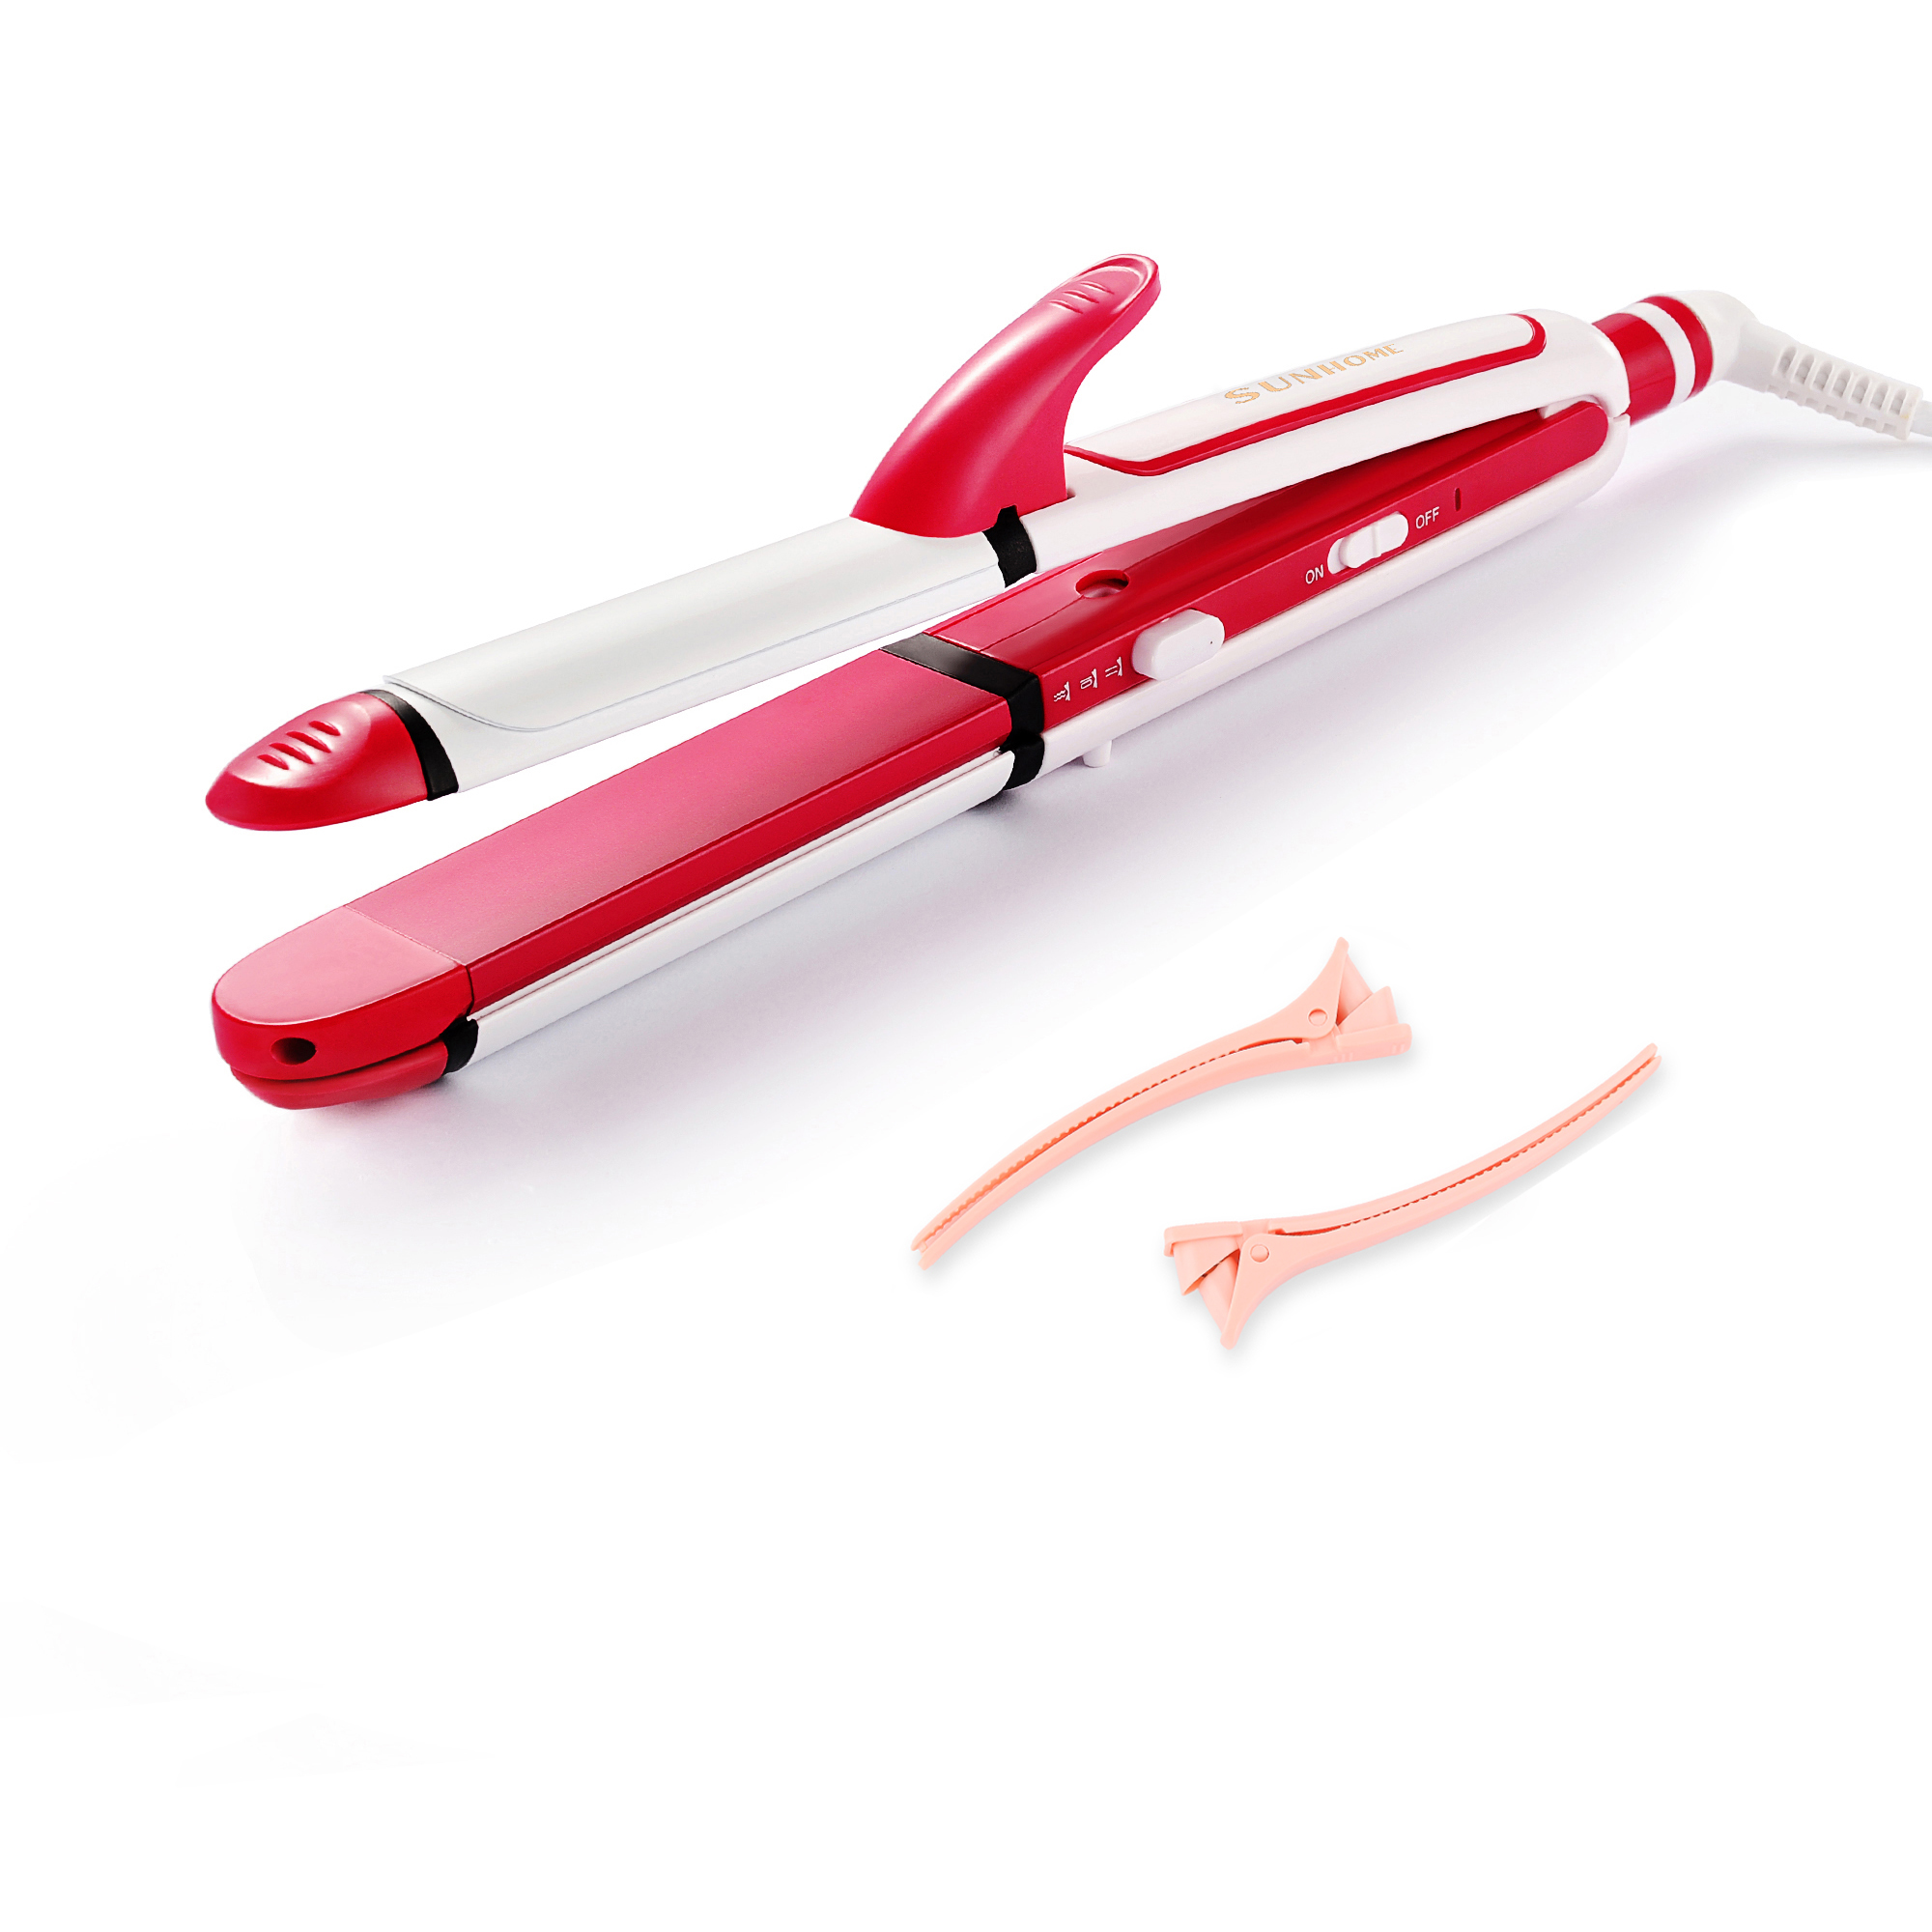 SUNHOME 3-In-1 Hair Curler With Crimper And Straighteneris Comes with 2 Hairclip.